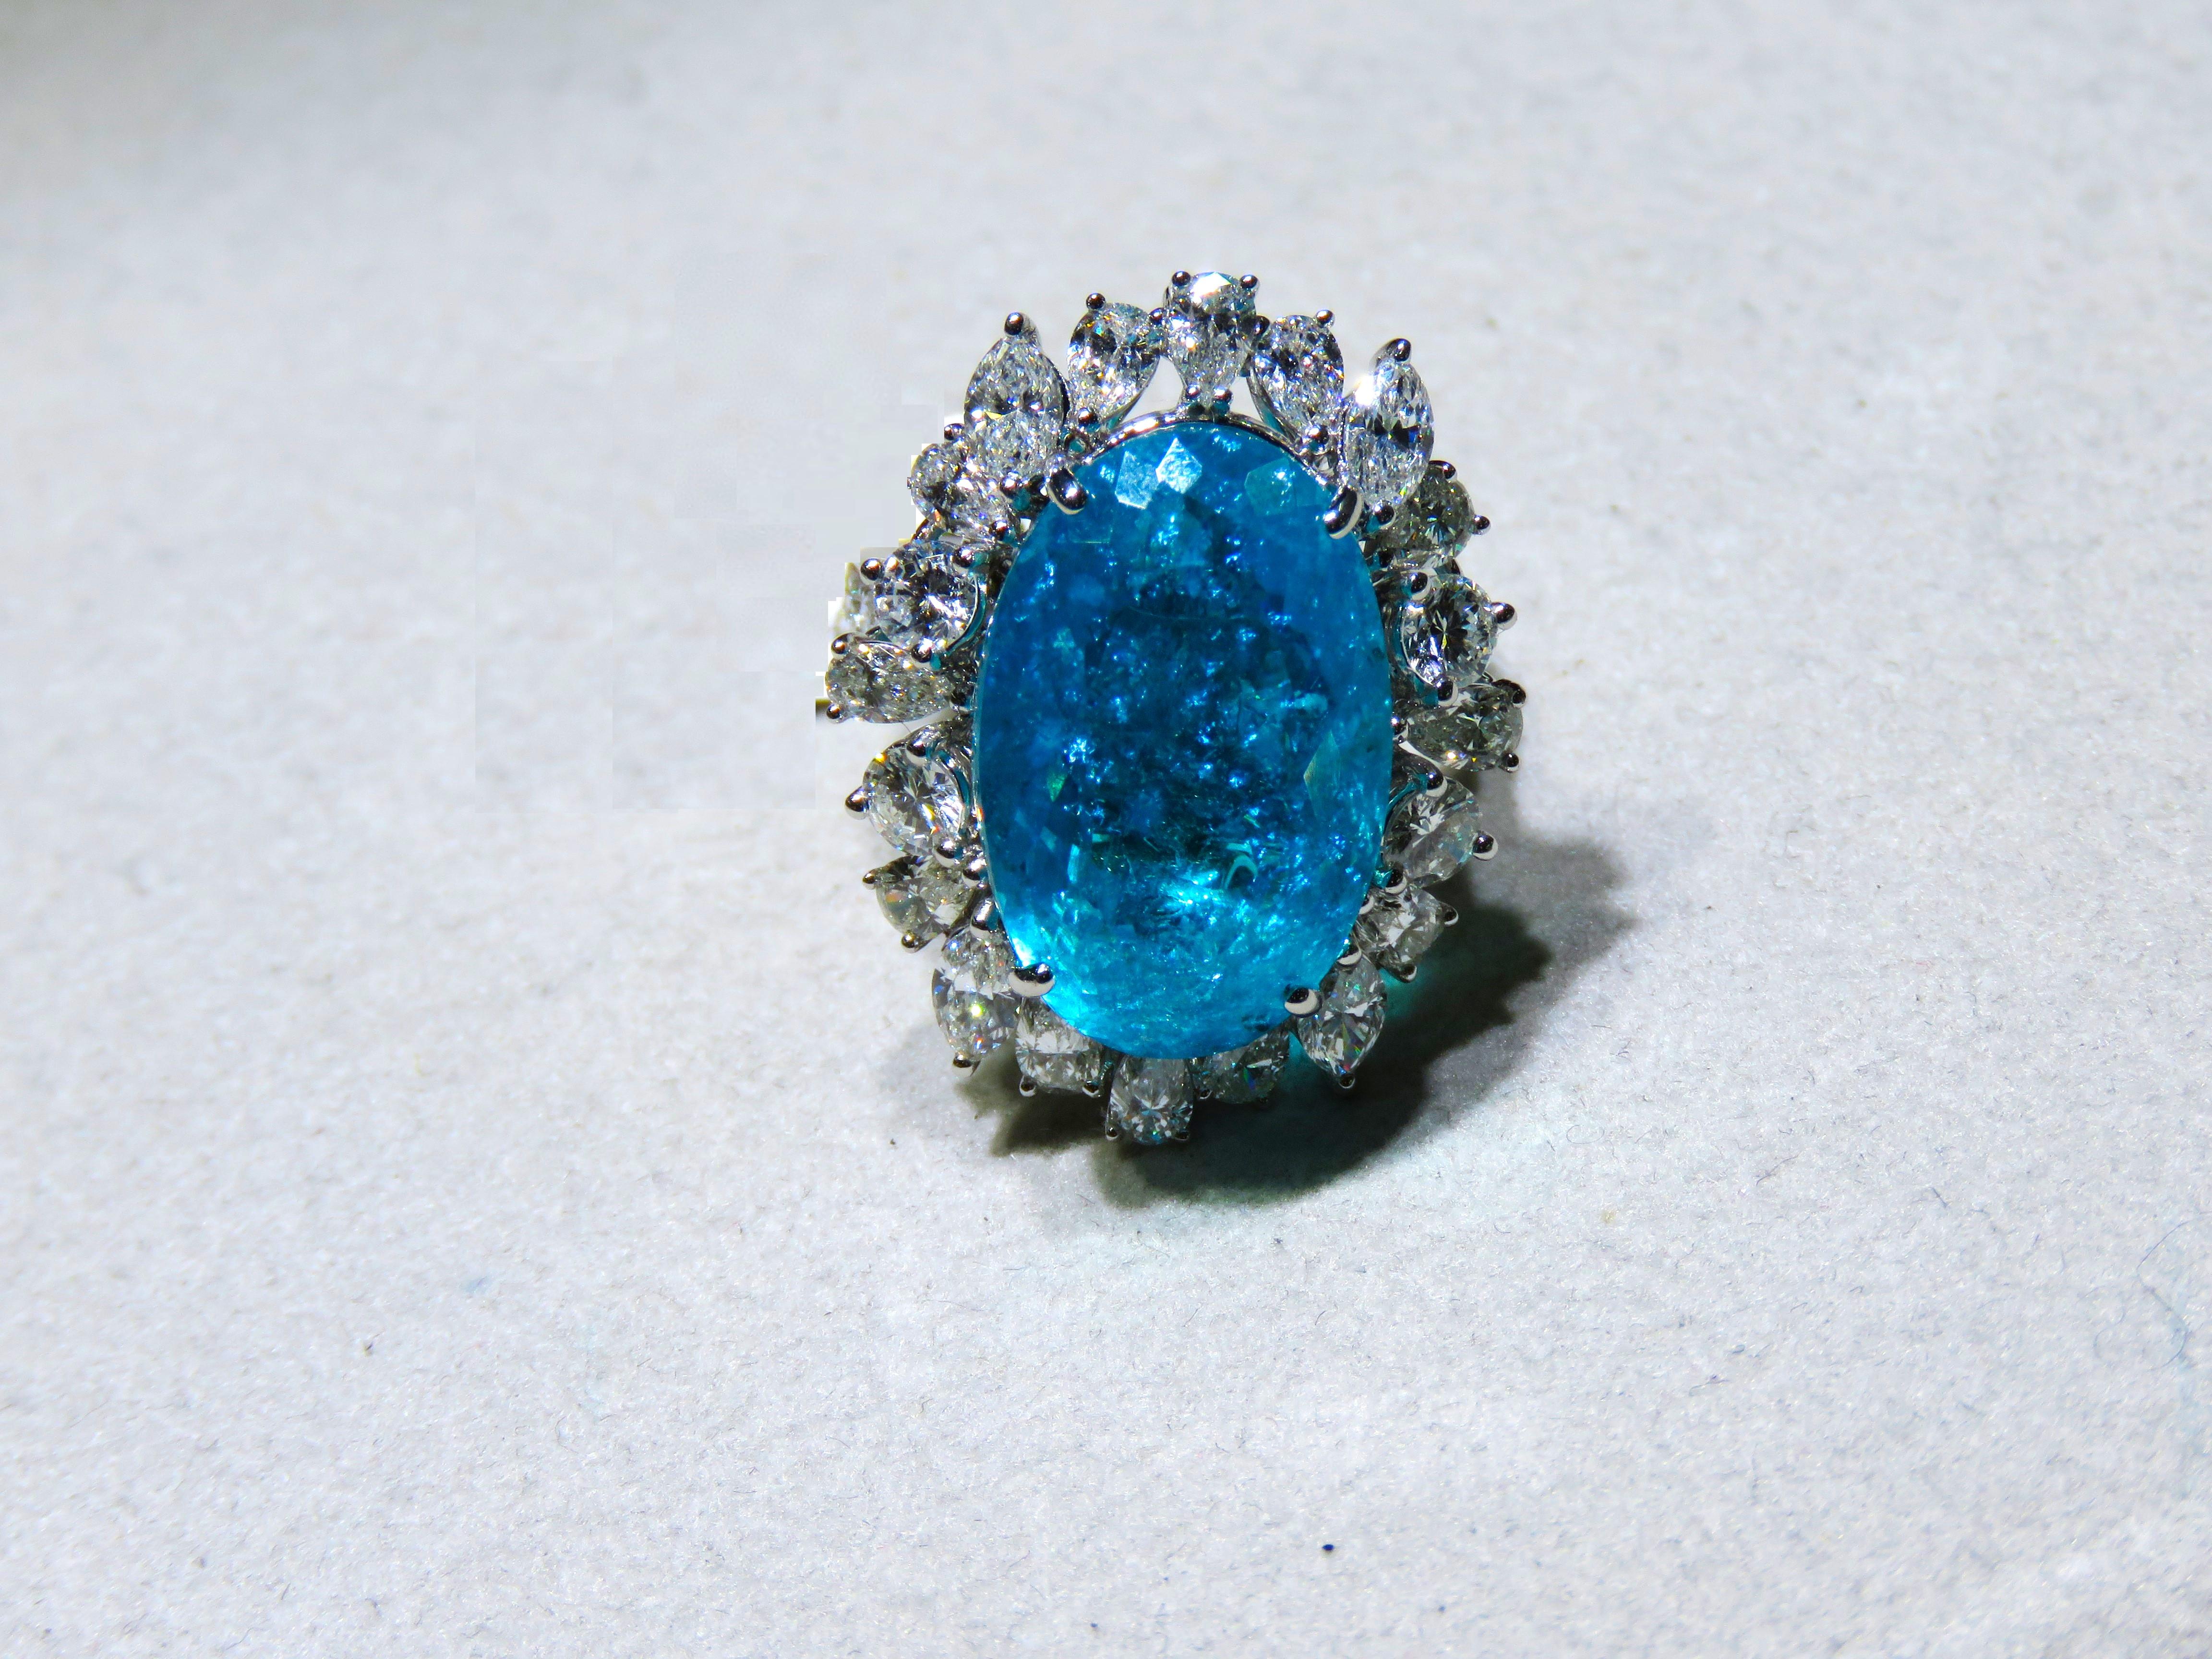 The Following Items we are offering is a Rare Important Spectacular and Brilliant 18KT Gold Large Massive Gorgeous Paraiba and Diamond Ring. Ring consists of Rare a Large Fine Magnificent Paraiba Tourmaline surrounded and Framed with Gorgeous